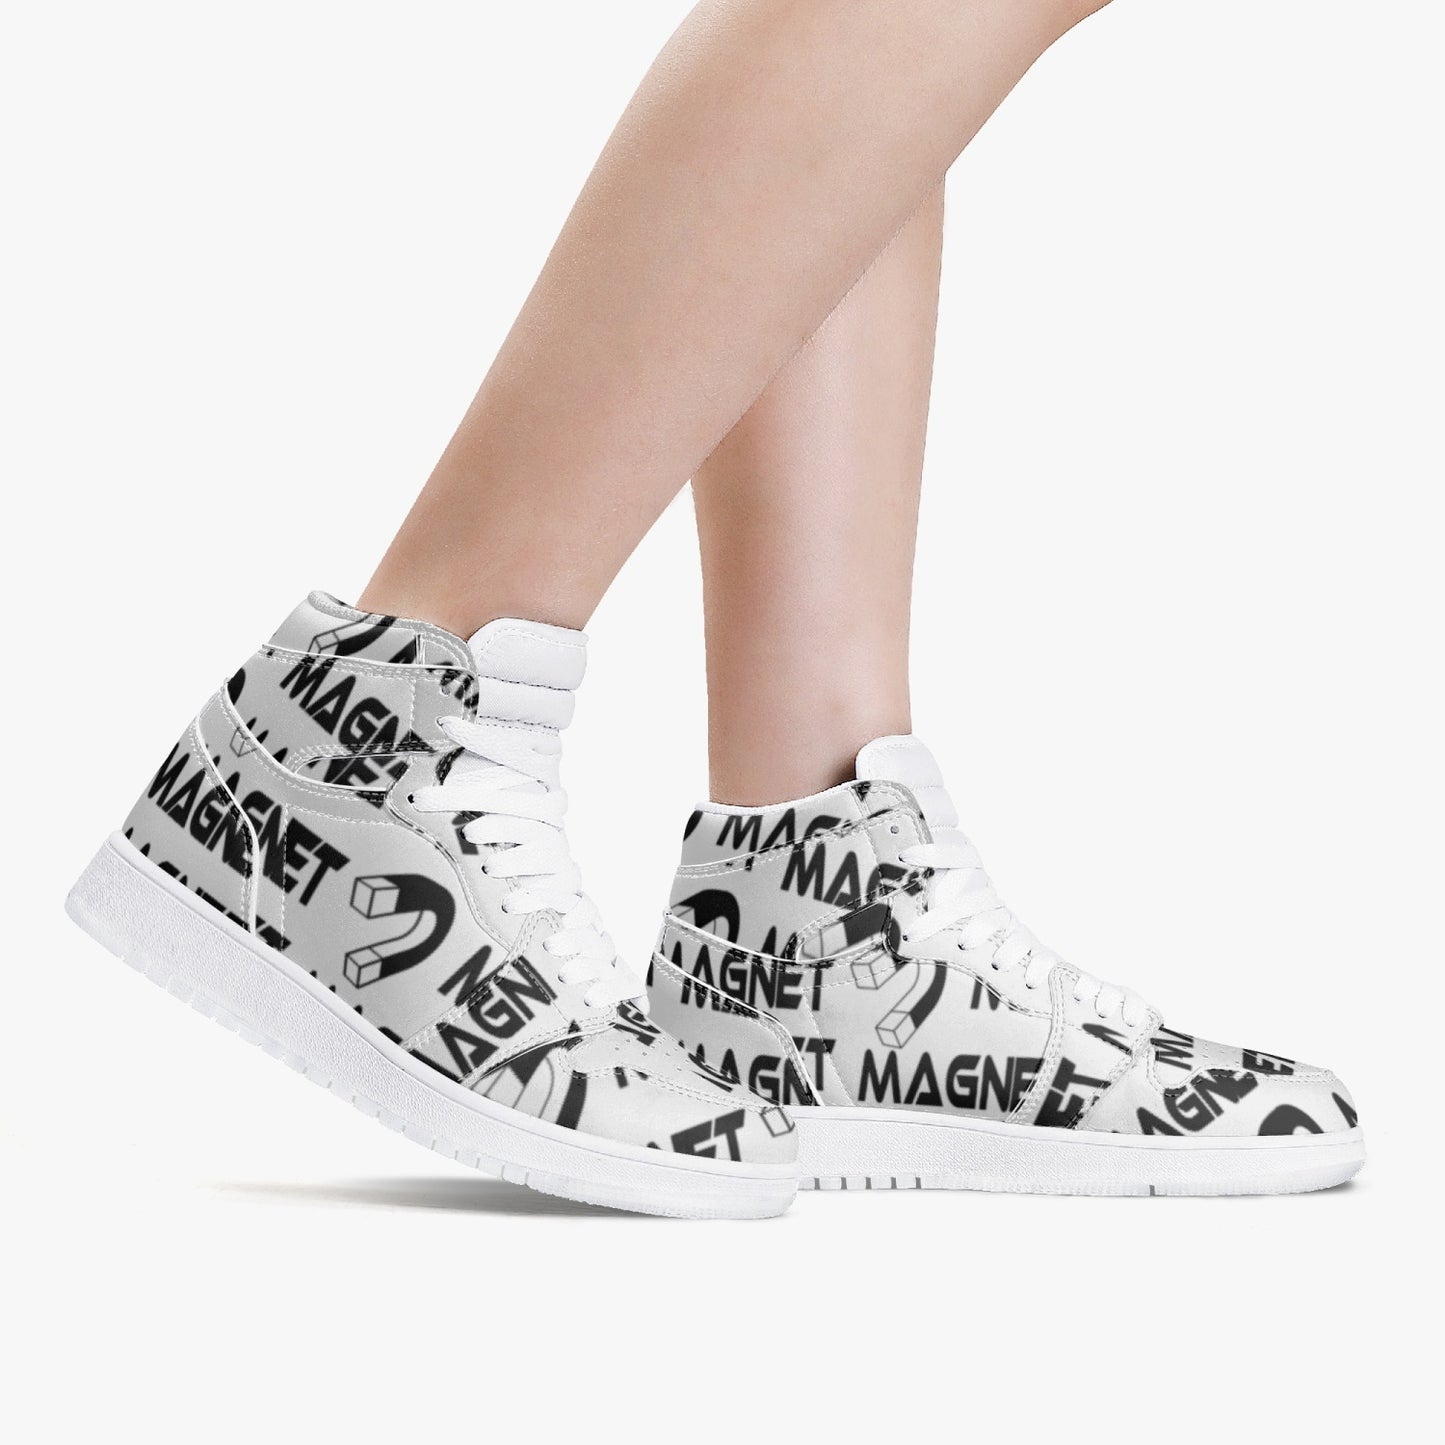 Magnet "I am different" New High-Top Leather Sneakers - White